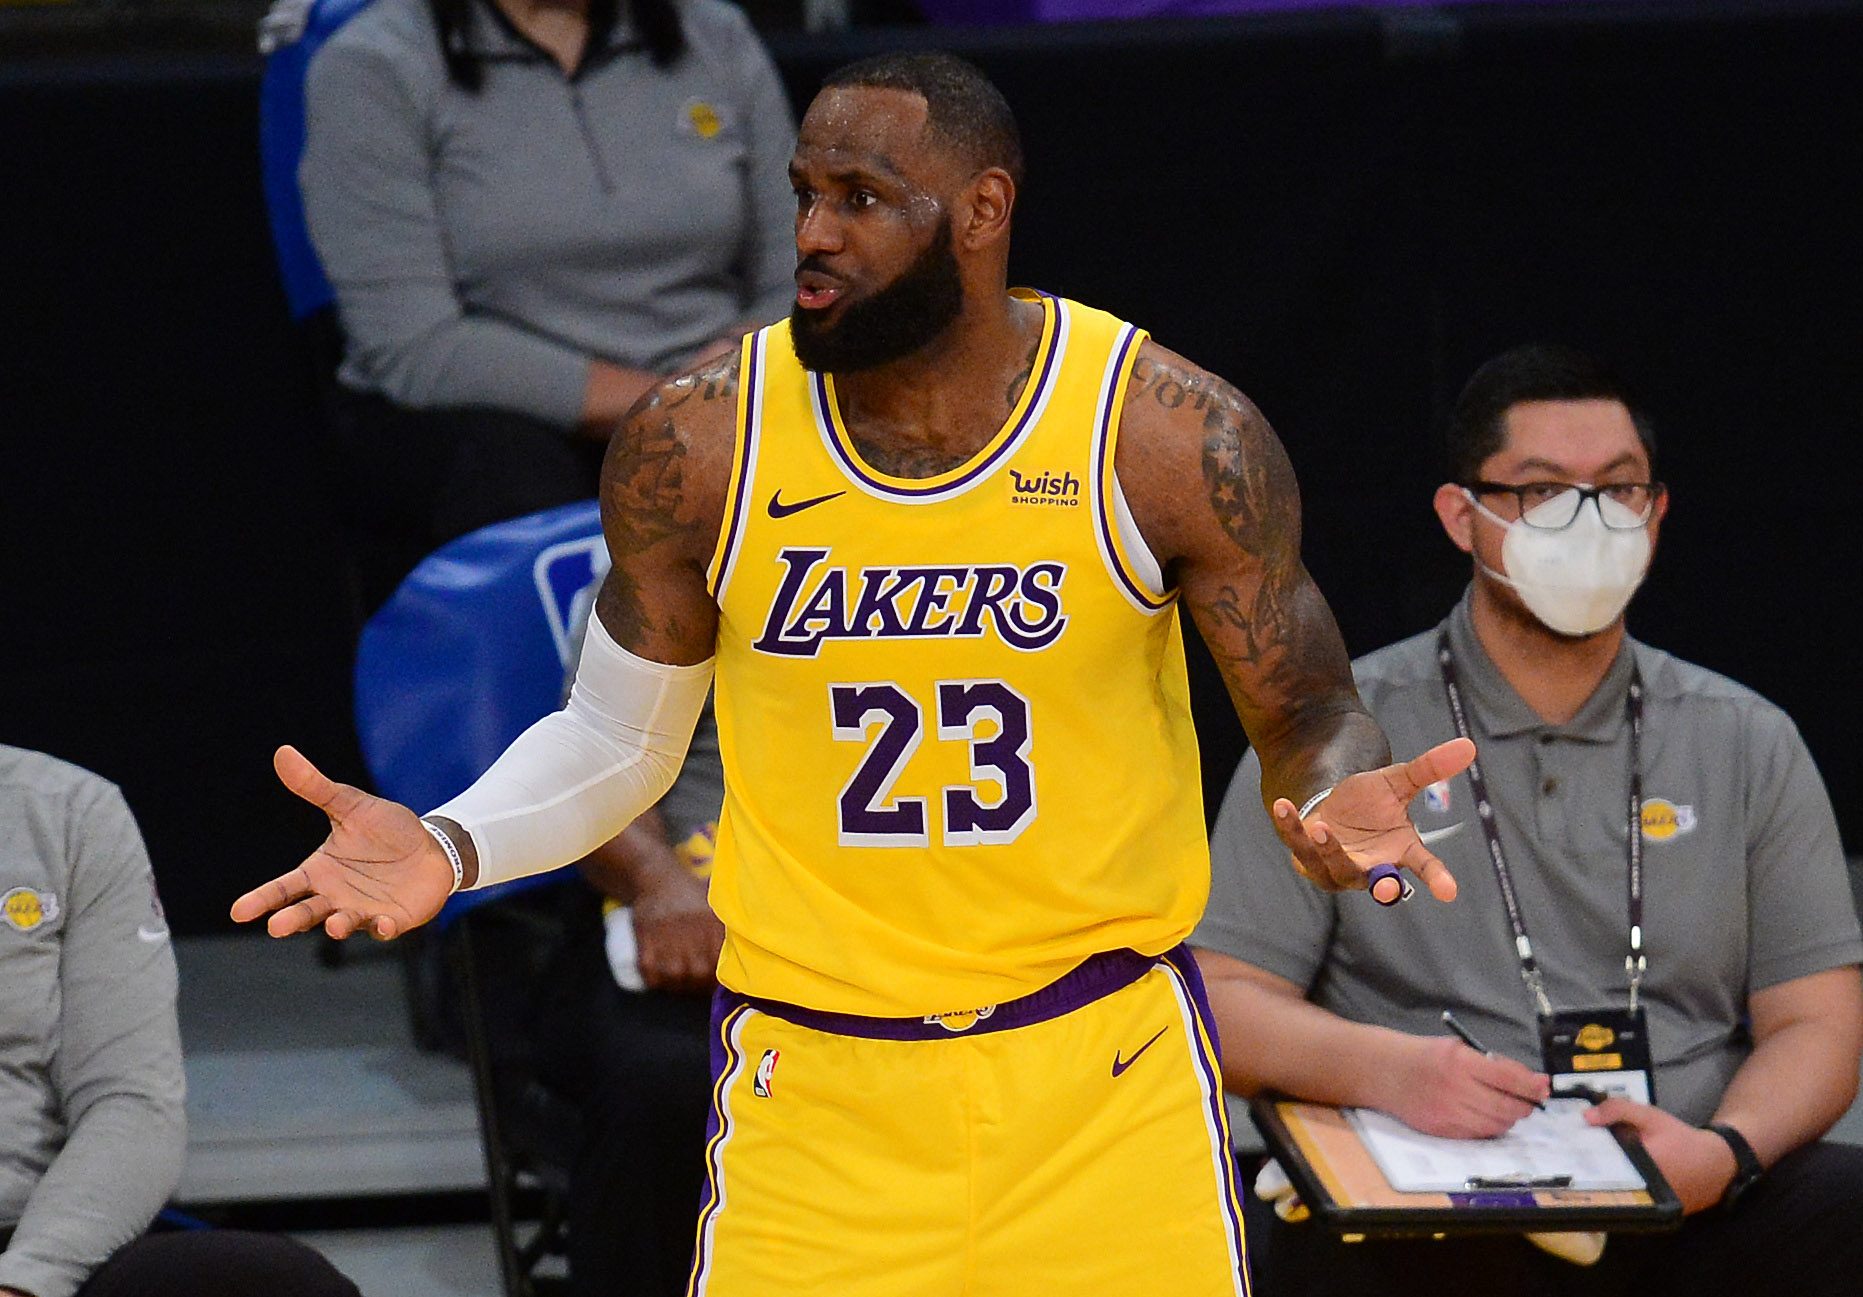 Lakers superstar LeBron James to sit out vs Kings